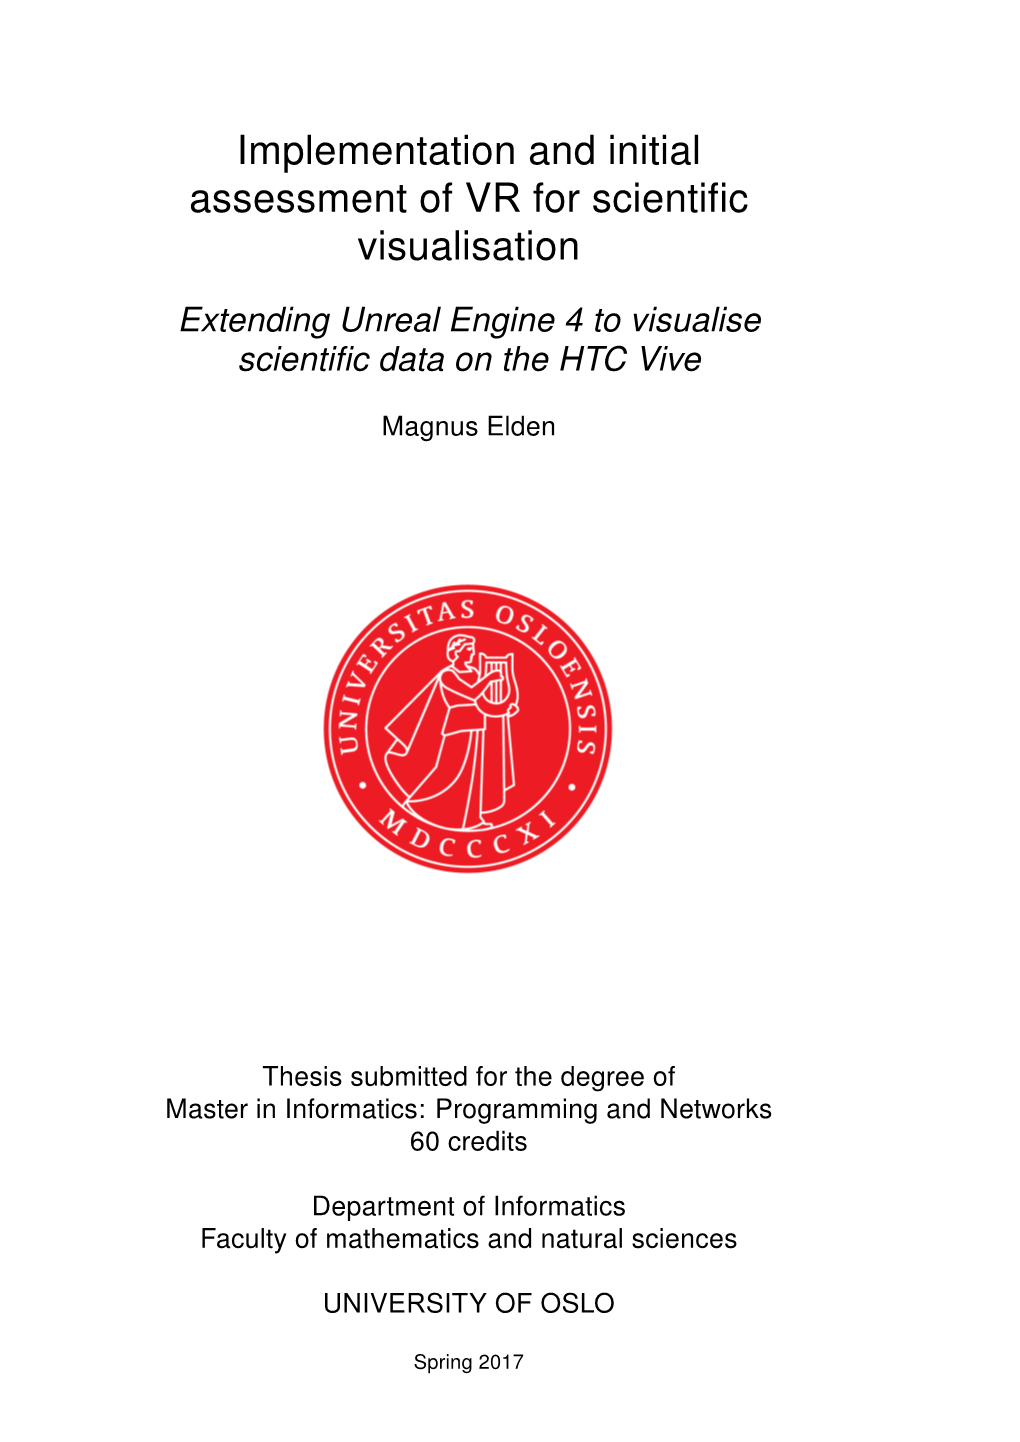 Implementation and Initial Assessment of VR for Scientific Visualisation